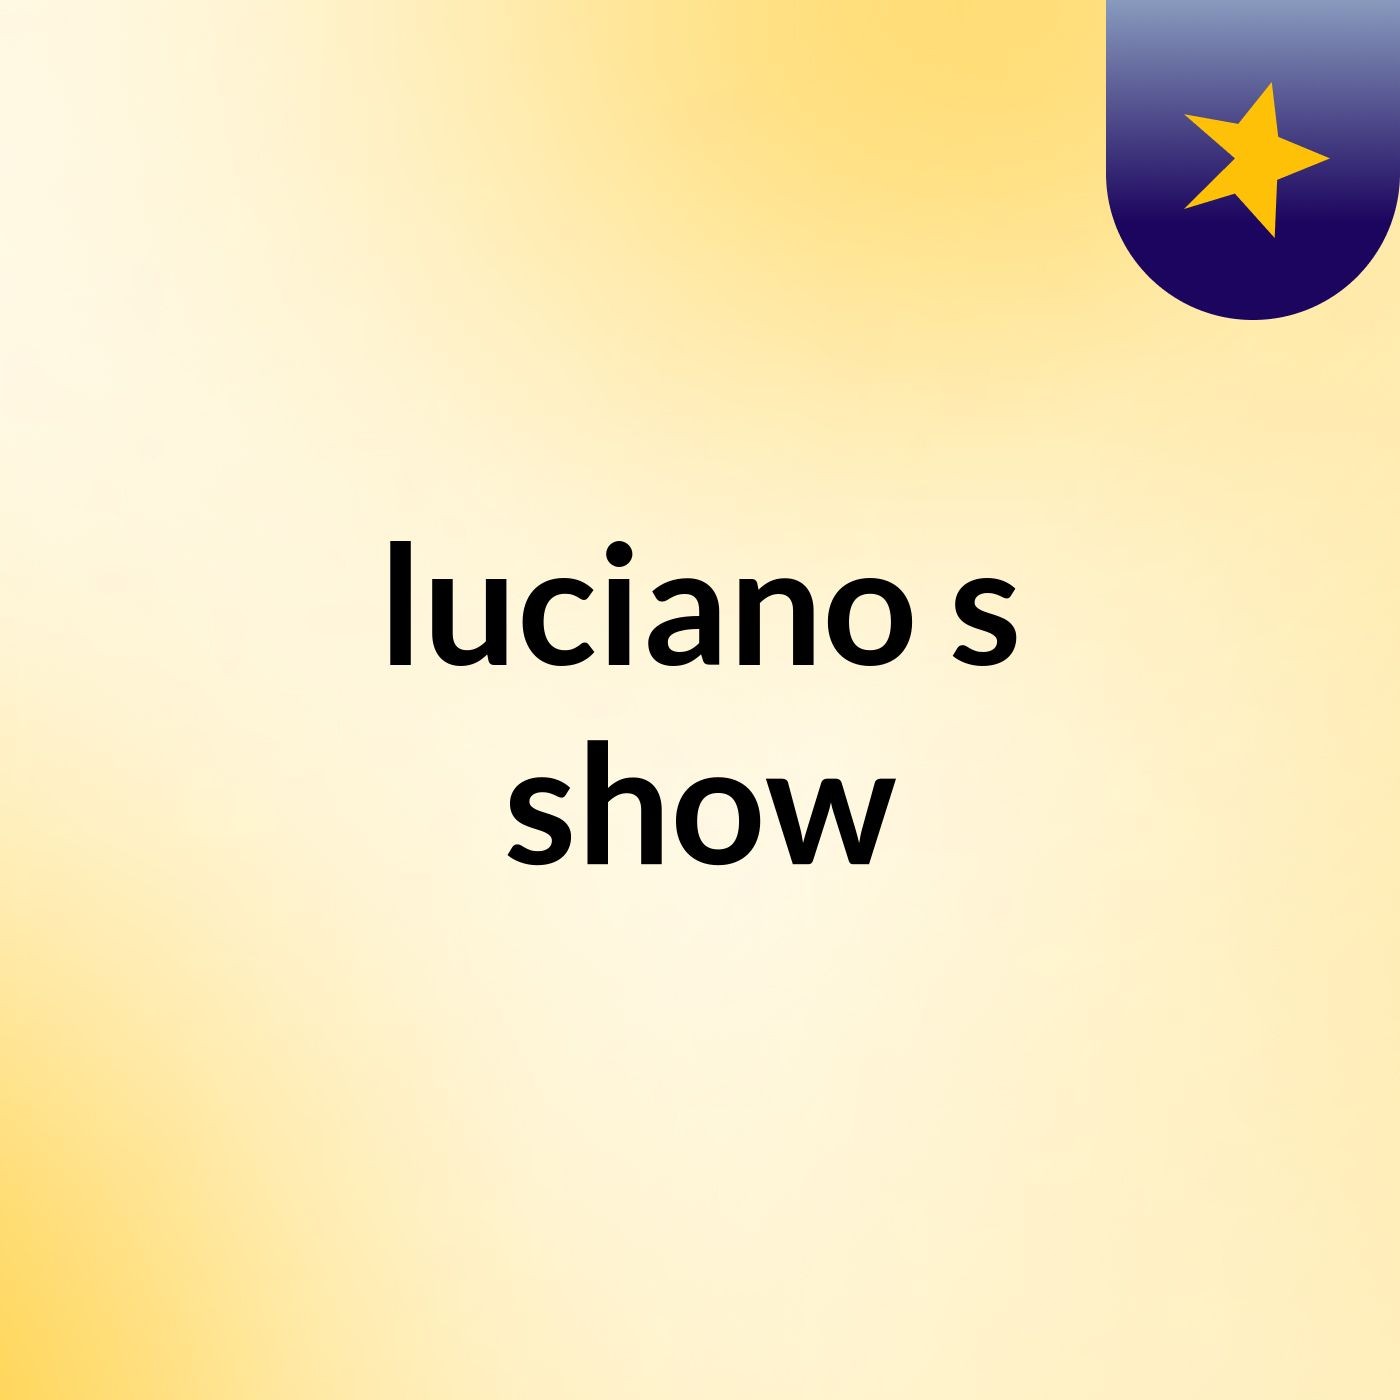 luciano's show